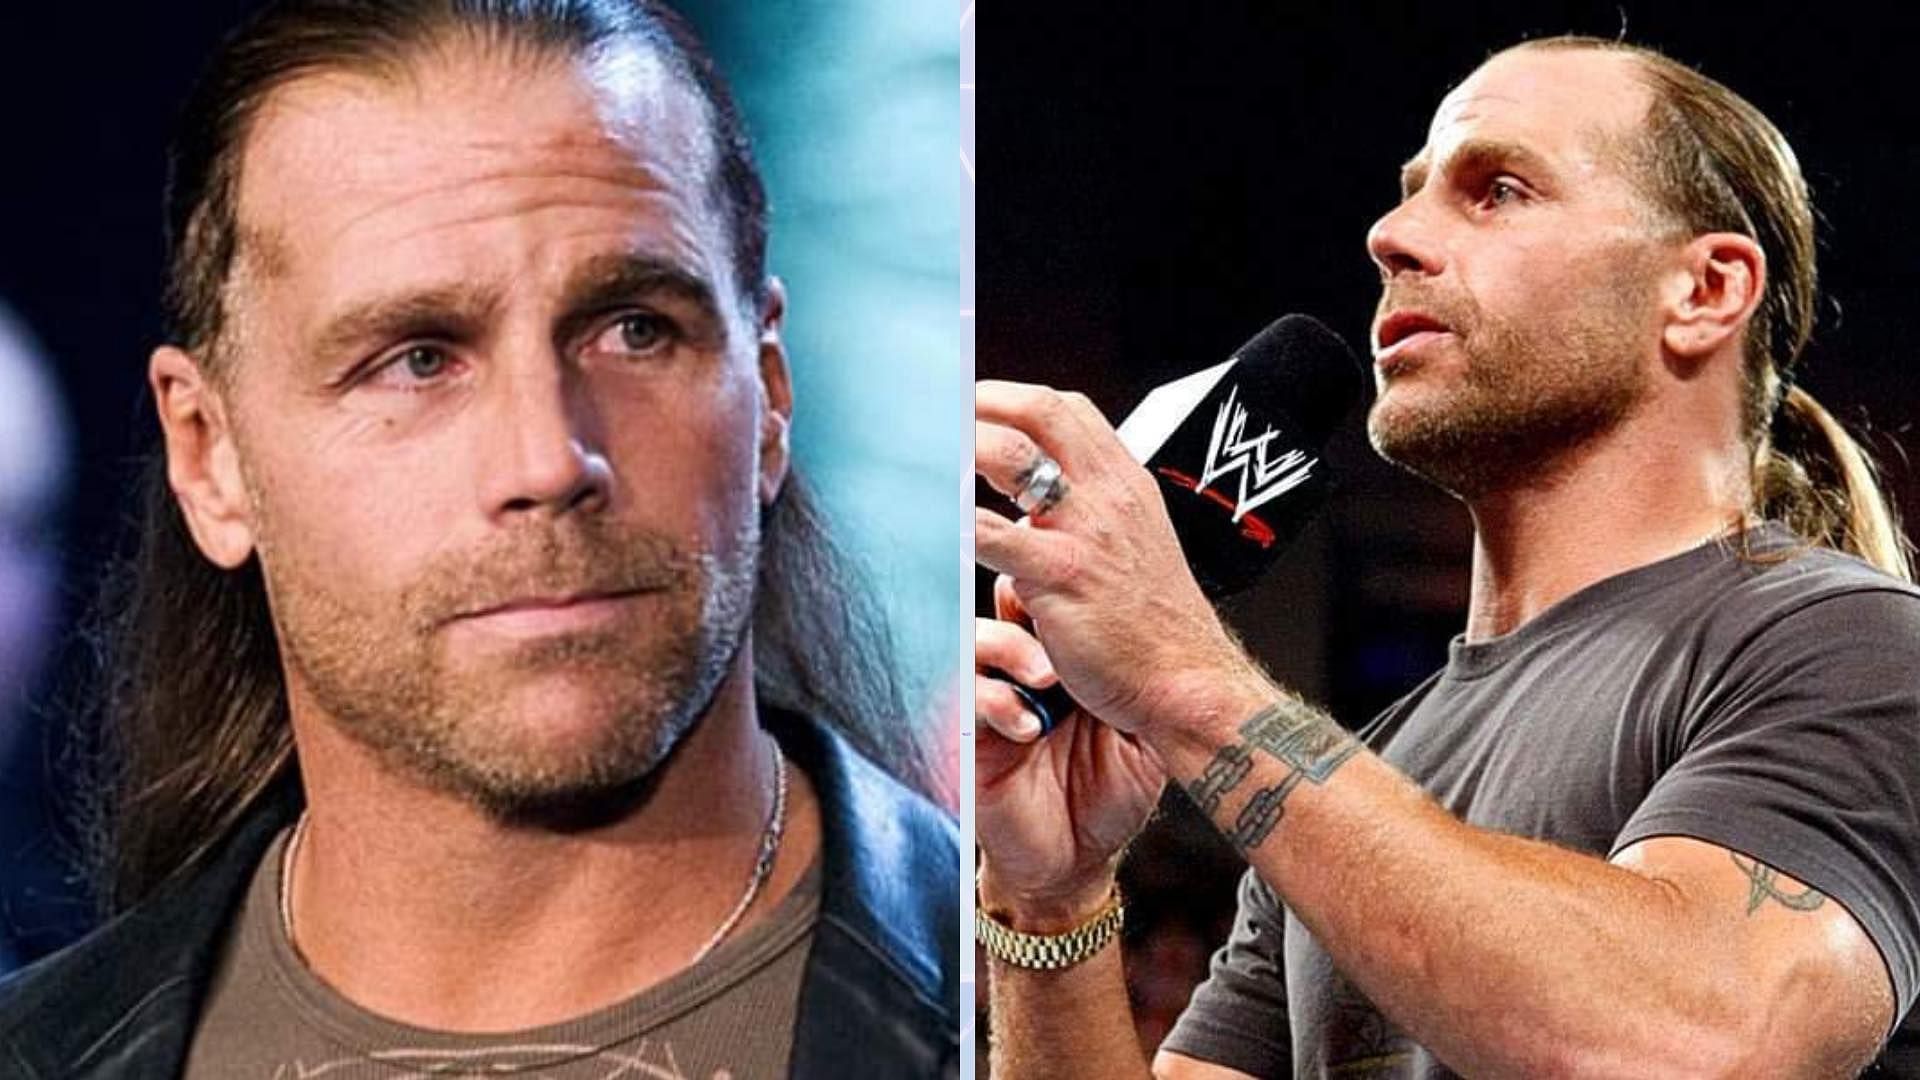 Shawn Michaels is a WWE backstage producer for NXT.